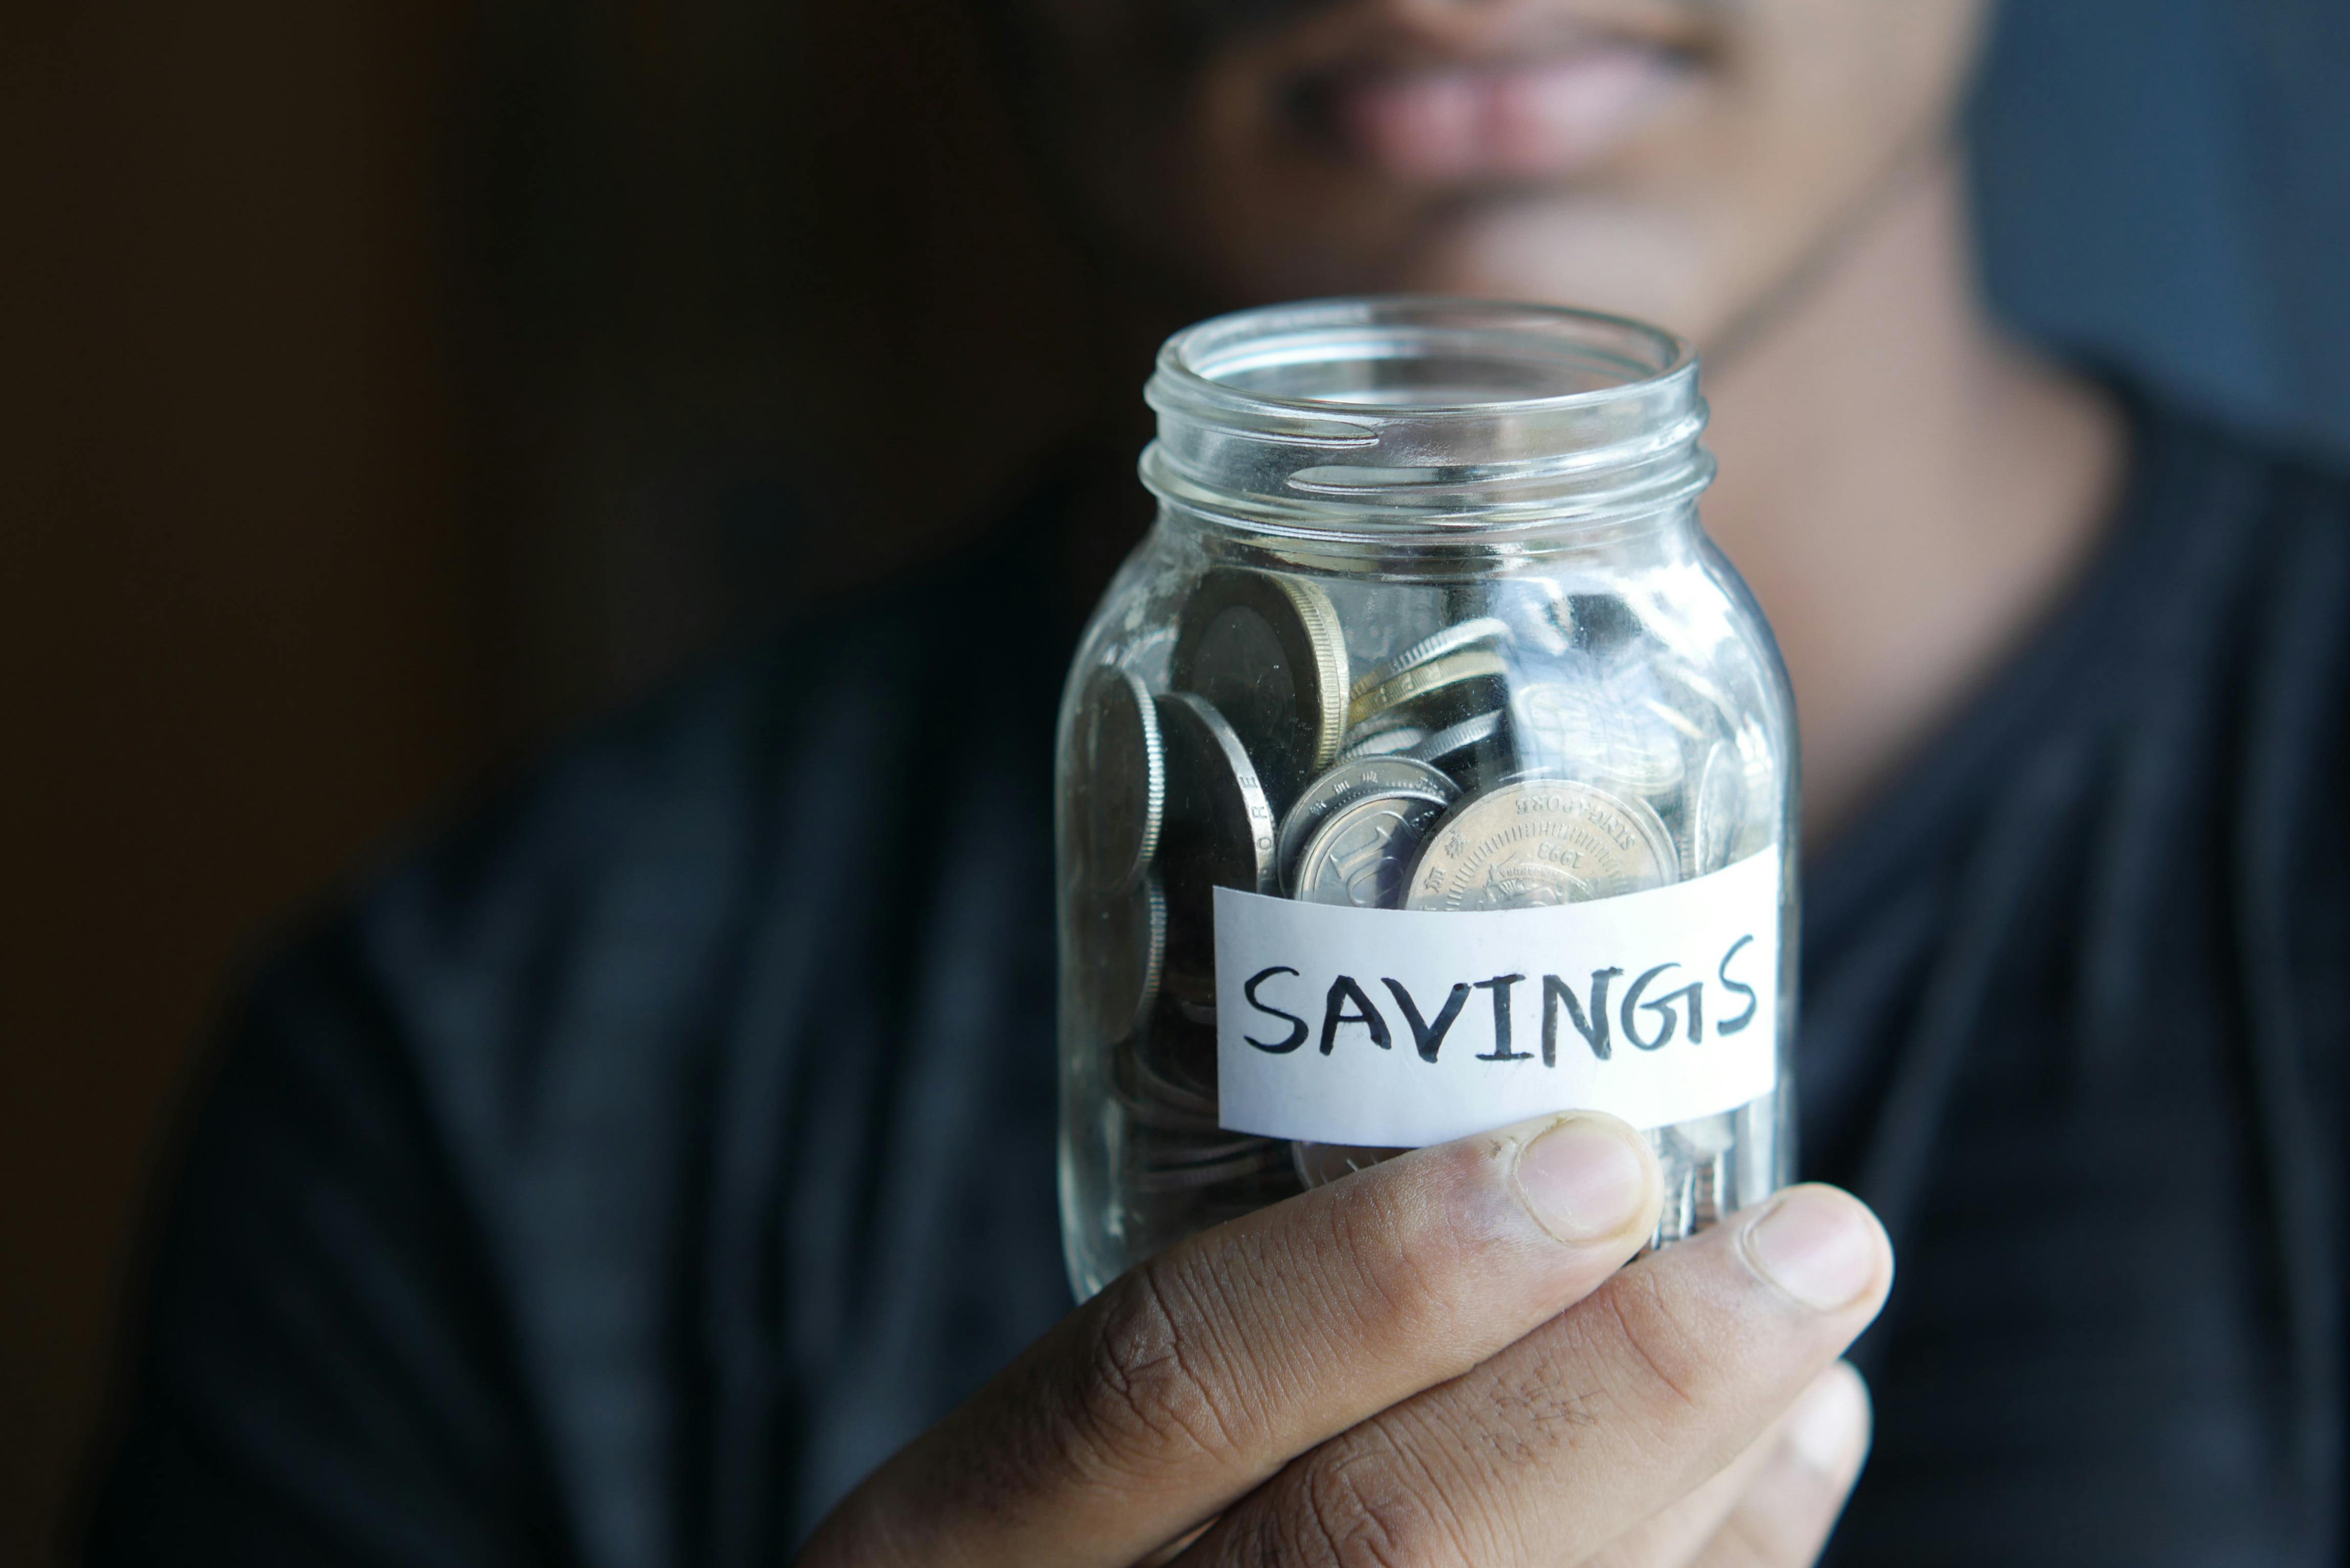 A person holding a savings jar with coins | Source: Pexels